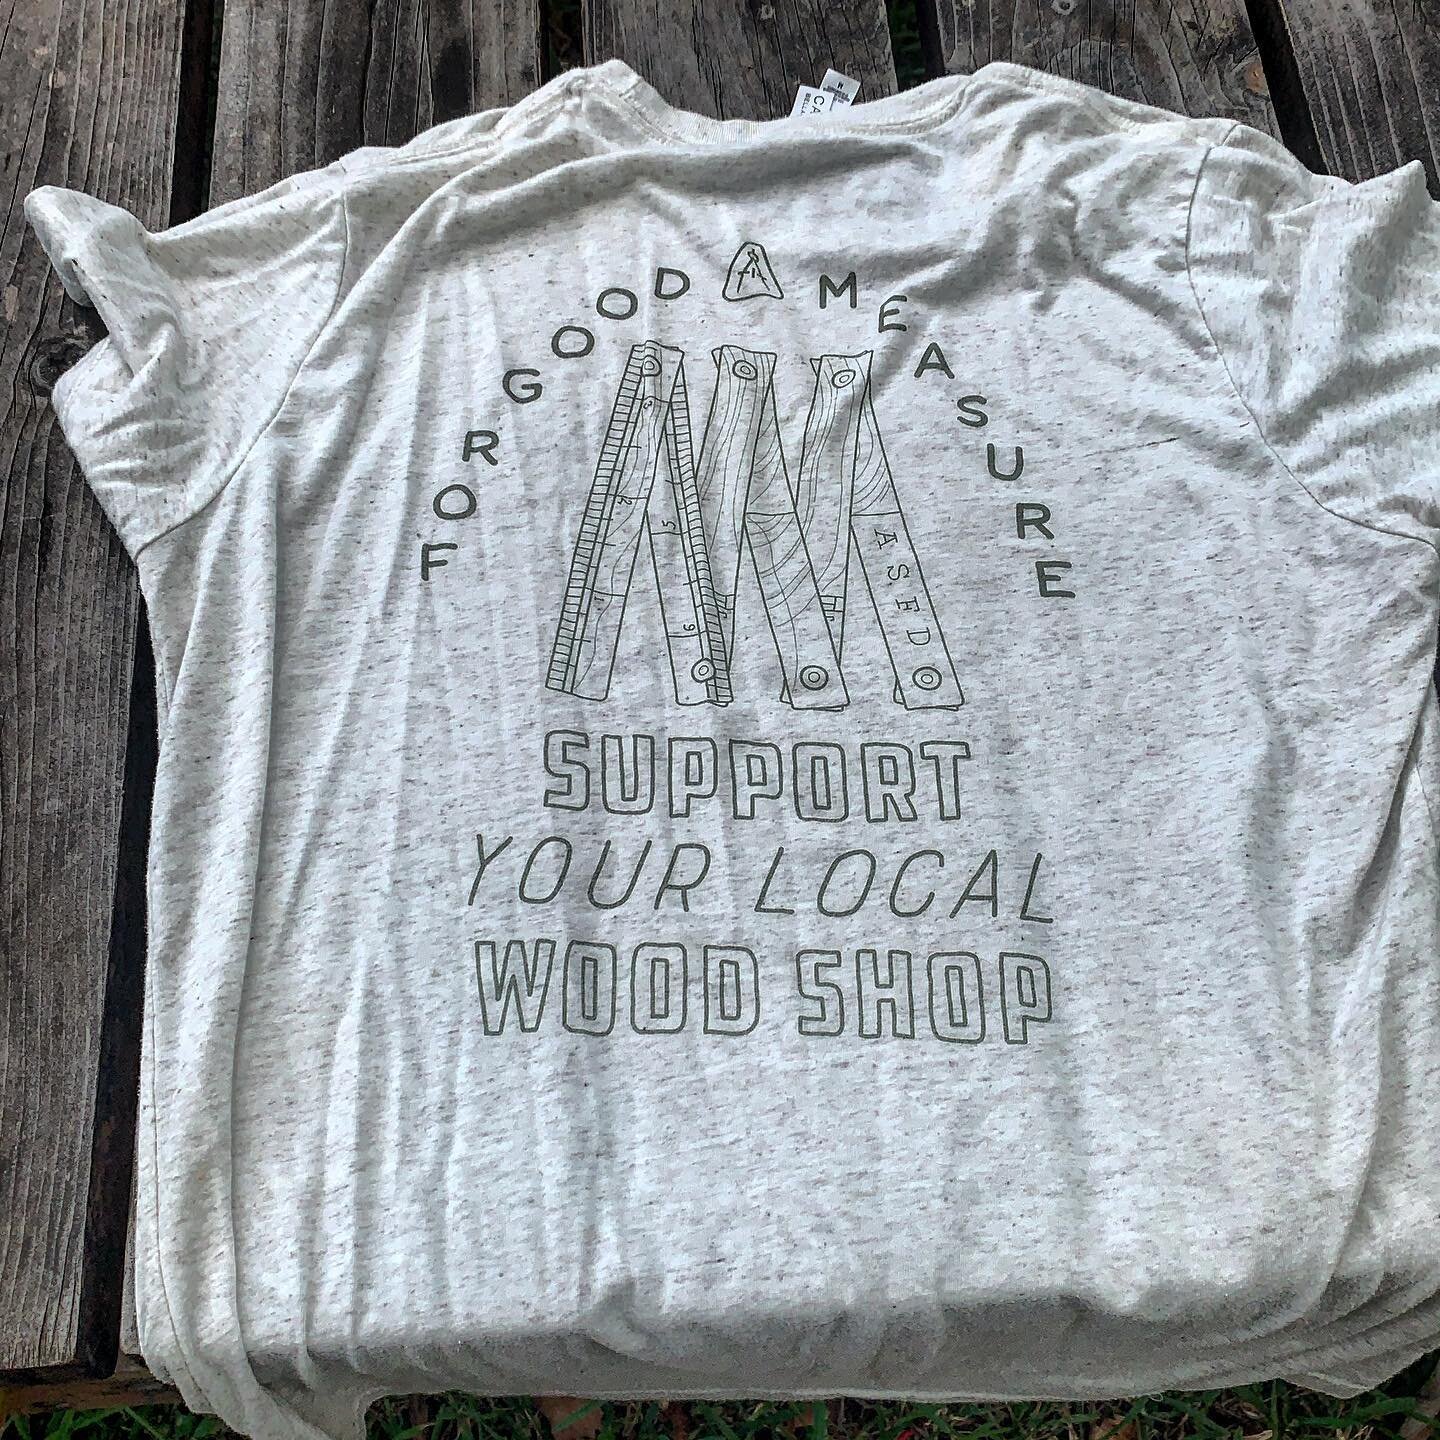 Buy a tshirt and support the great people over at @austinschooloffurniture !

#handtools#atxkids#woodworking #smallbusiness